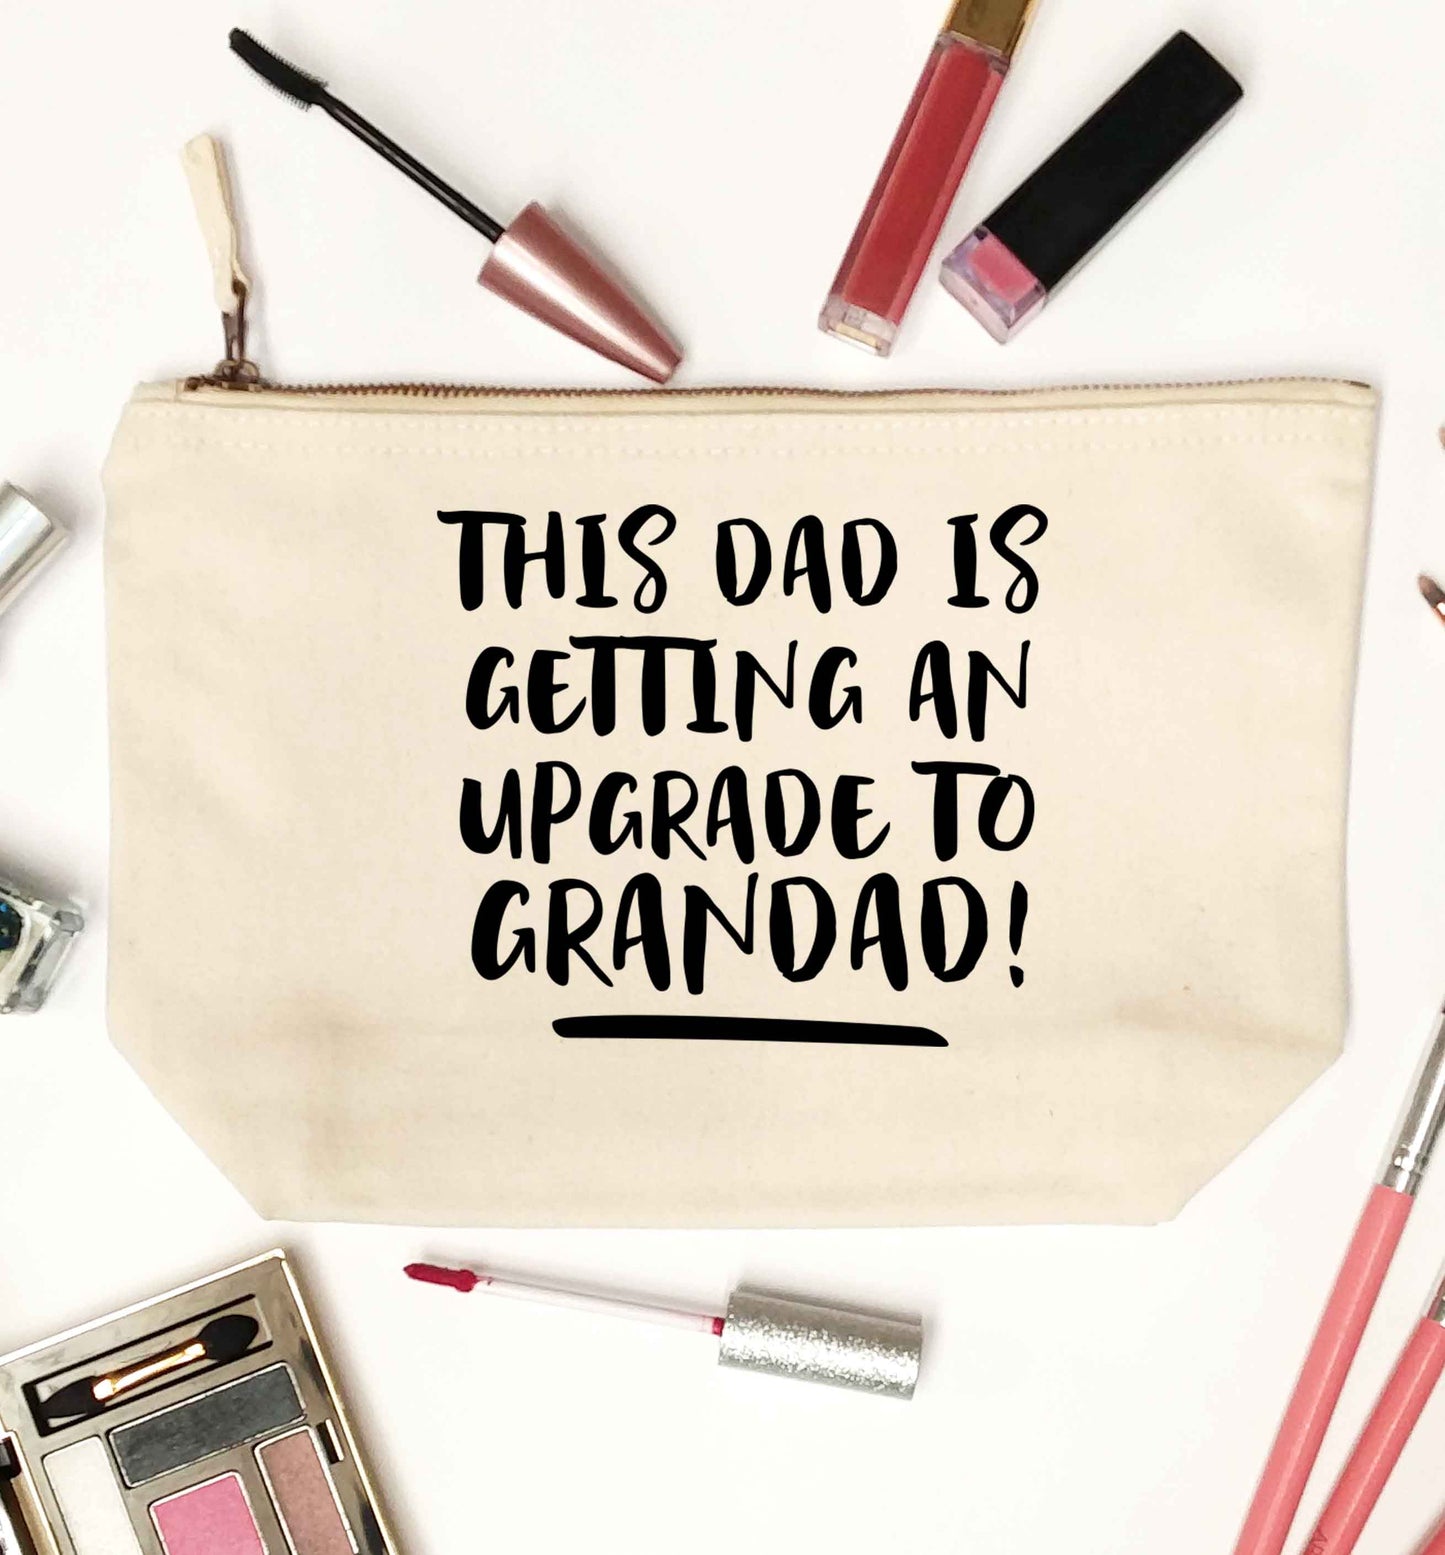 This dad is getting an upgrade to grandad! natural makeup bag